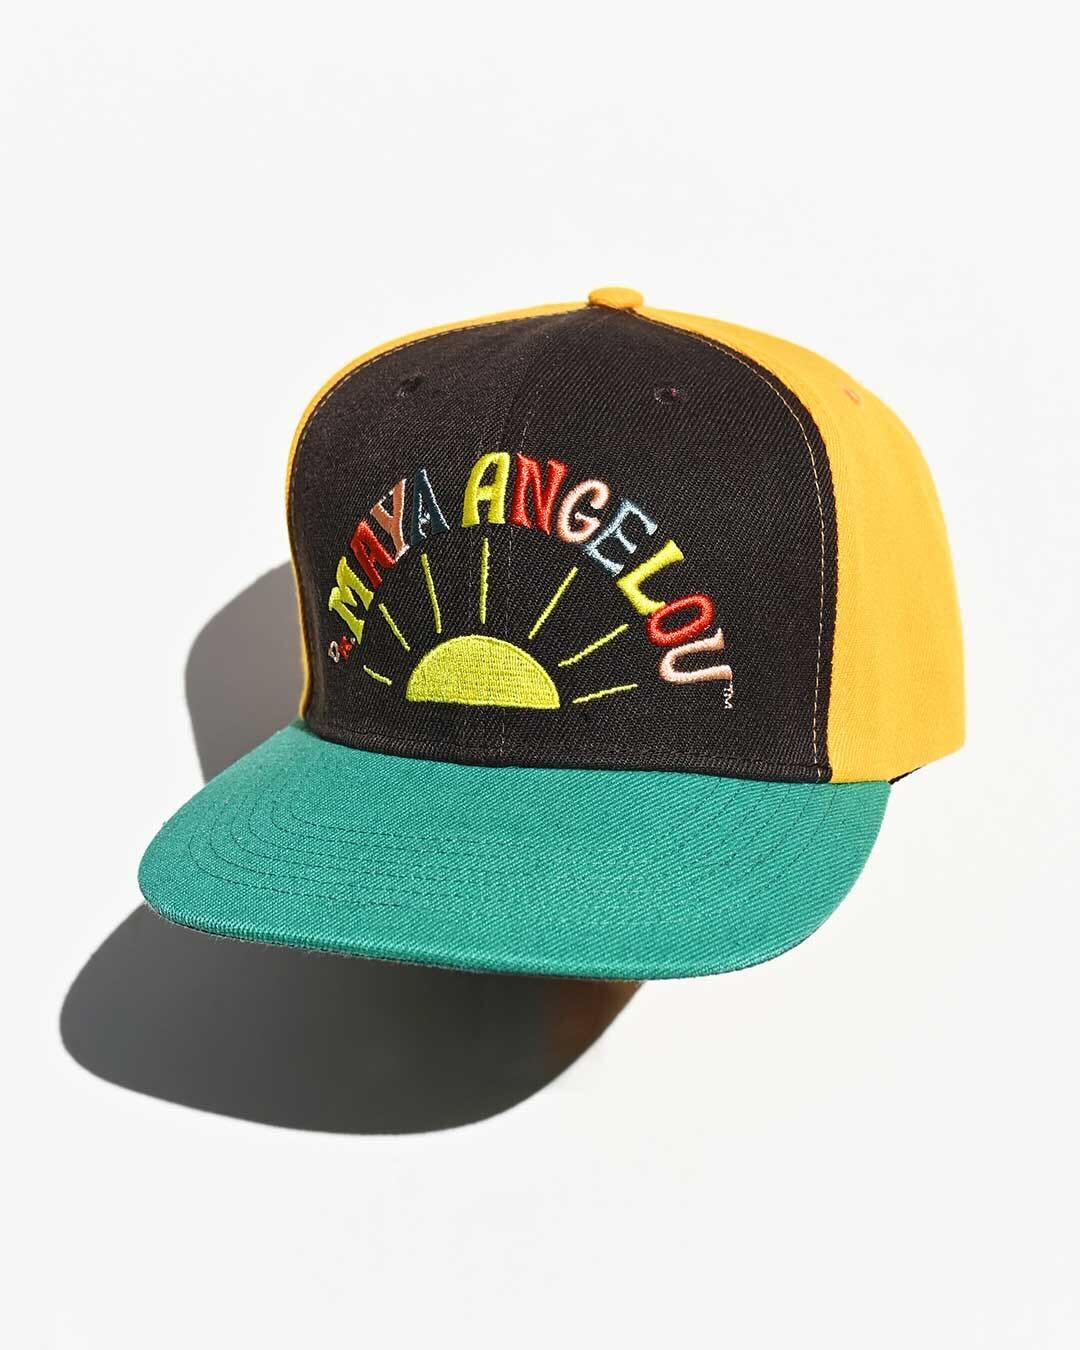 Maya Angelou Snapback Hat - Roots of Fight Canada